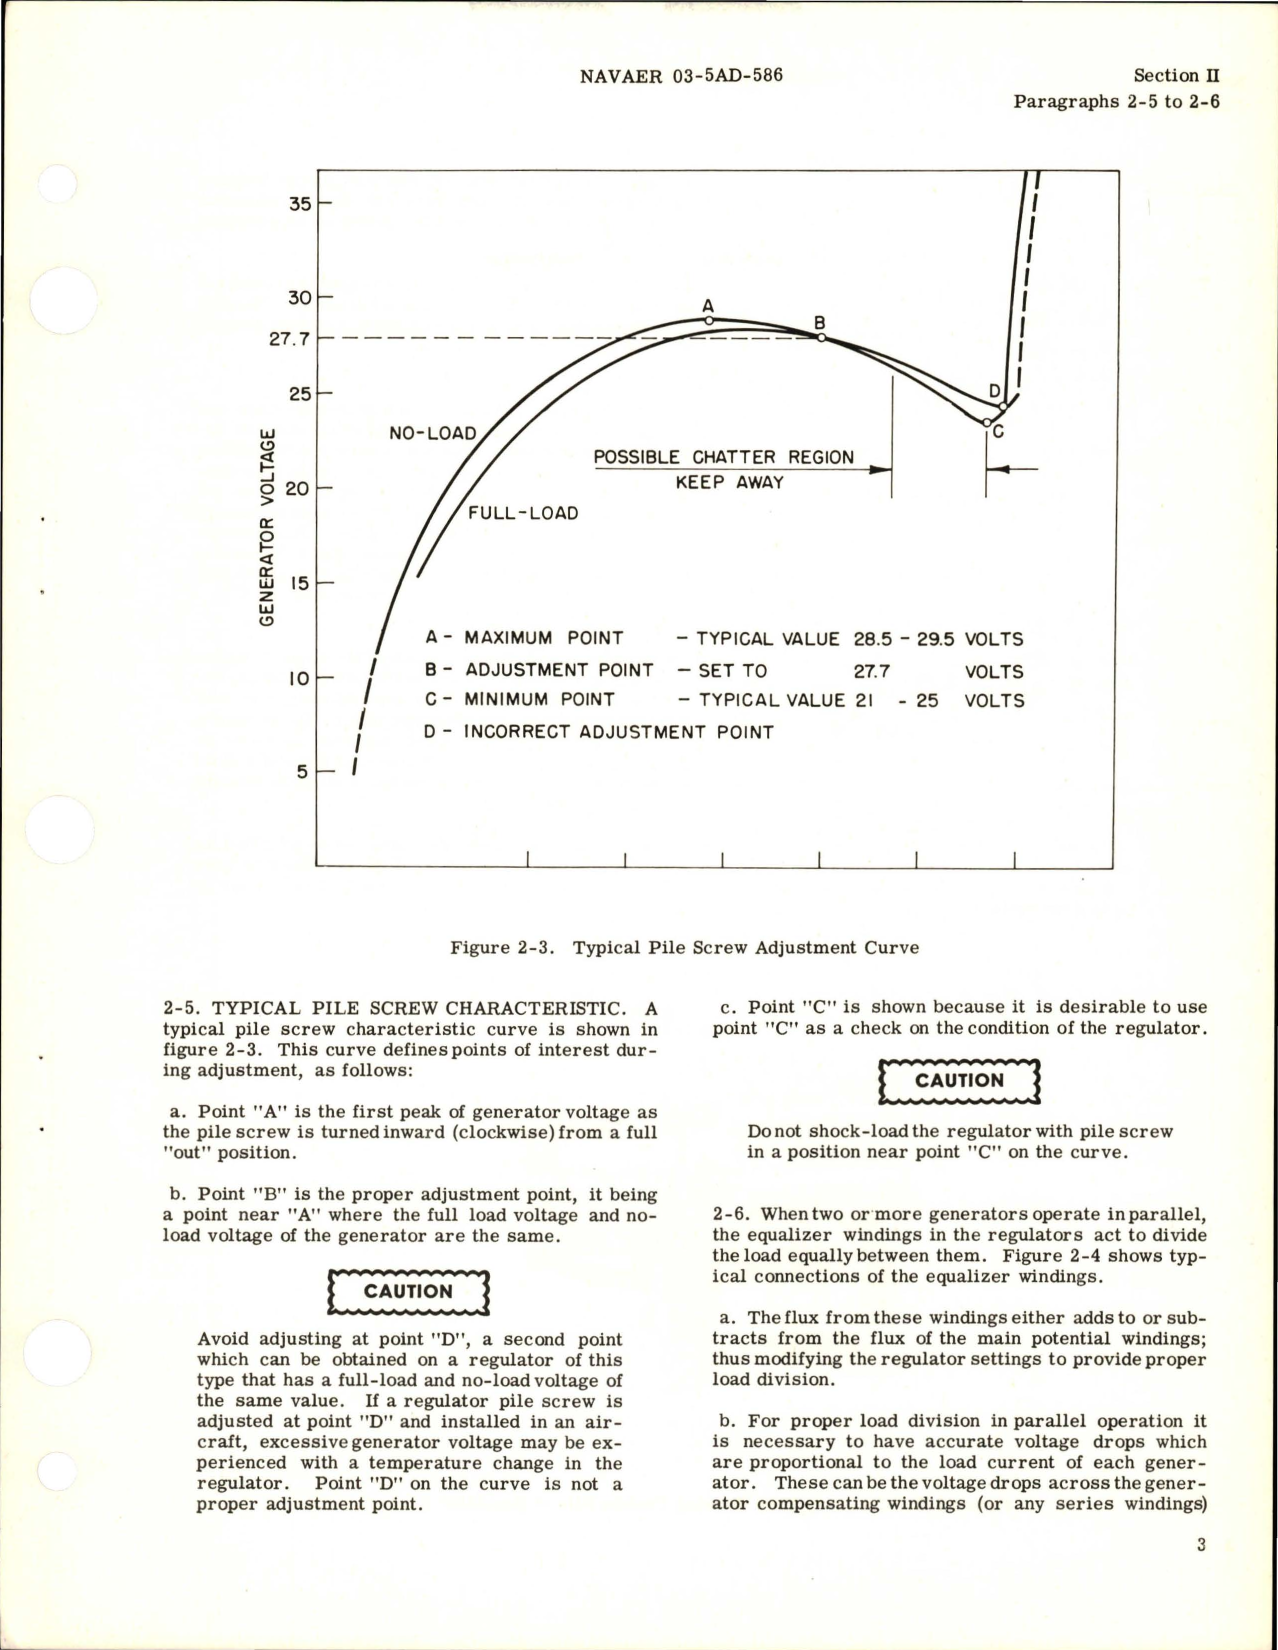 Sample page 7 from AirCorps Library document: Service and Overhaul Instructions for Generator Voltage Regulator - Model CR2795E100A1